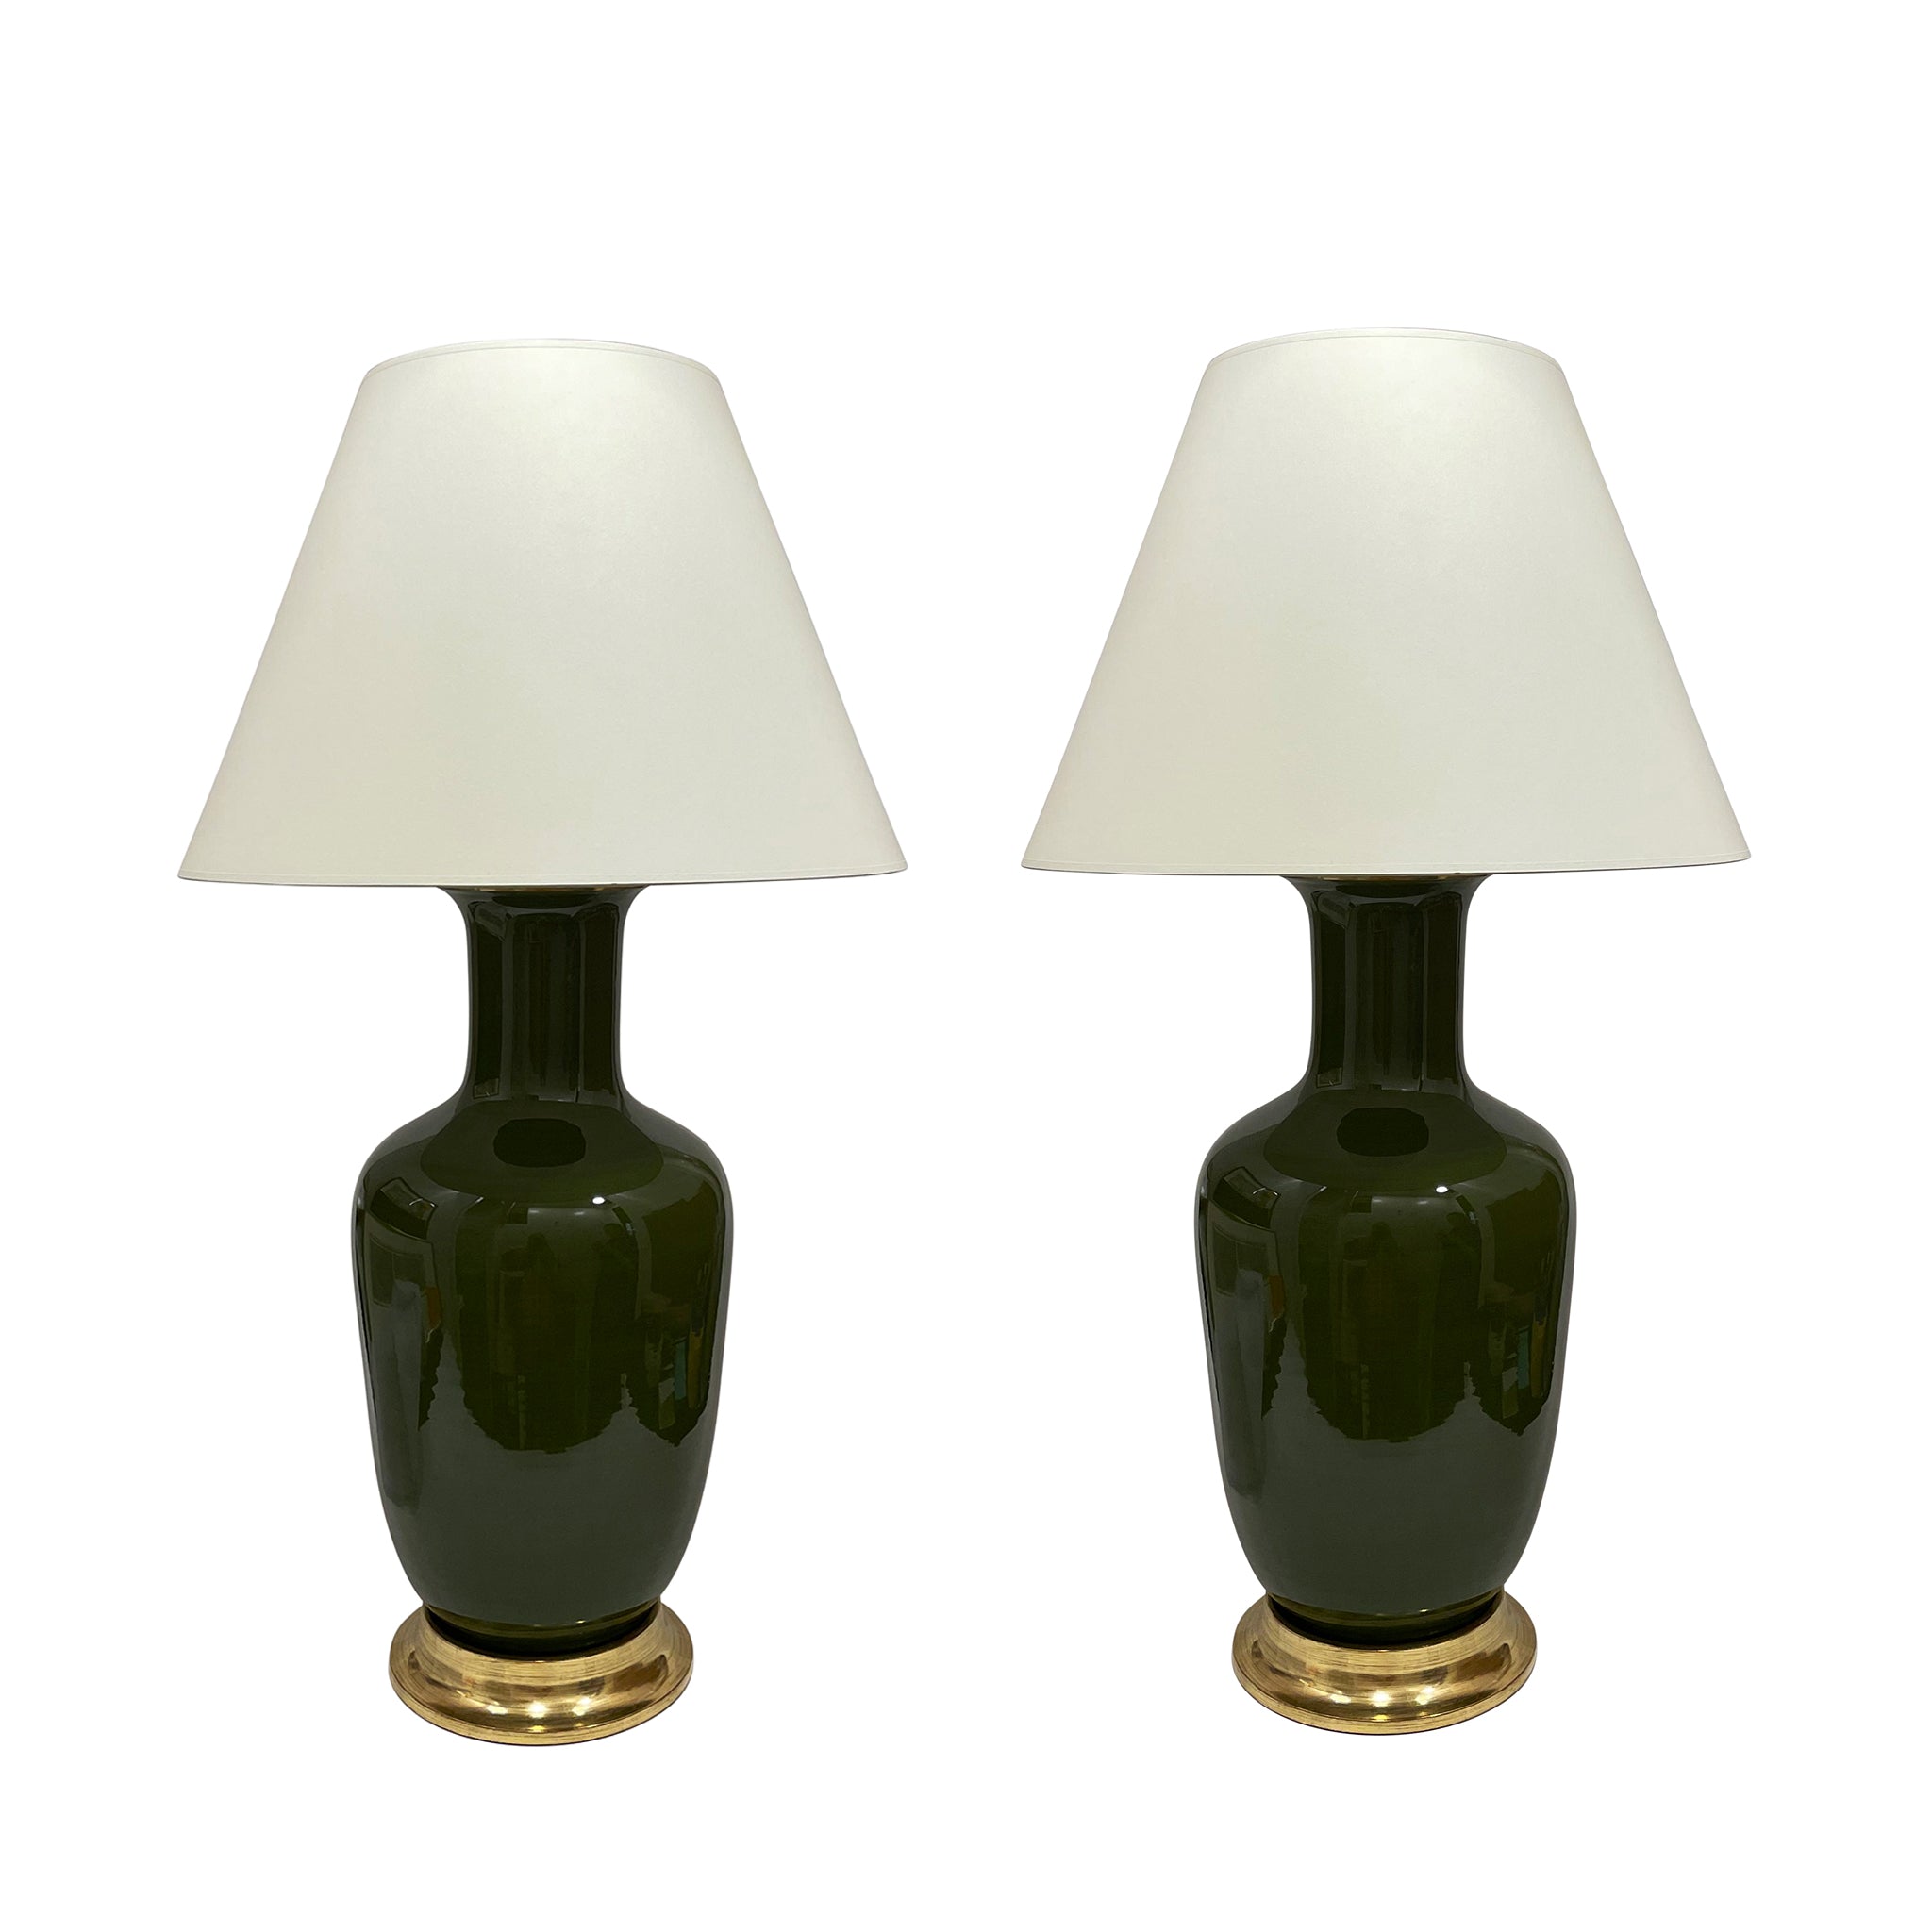 Pair of Ginger Jar Lamps in Spruce